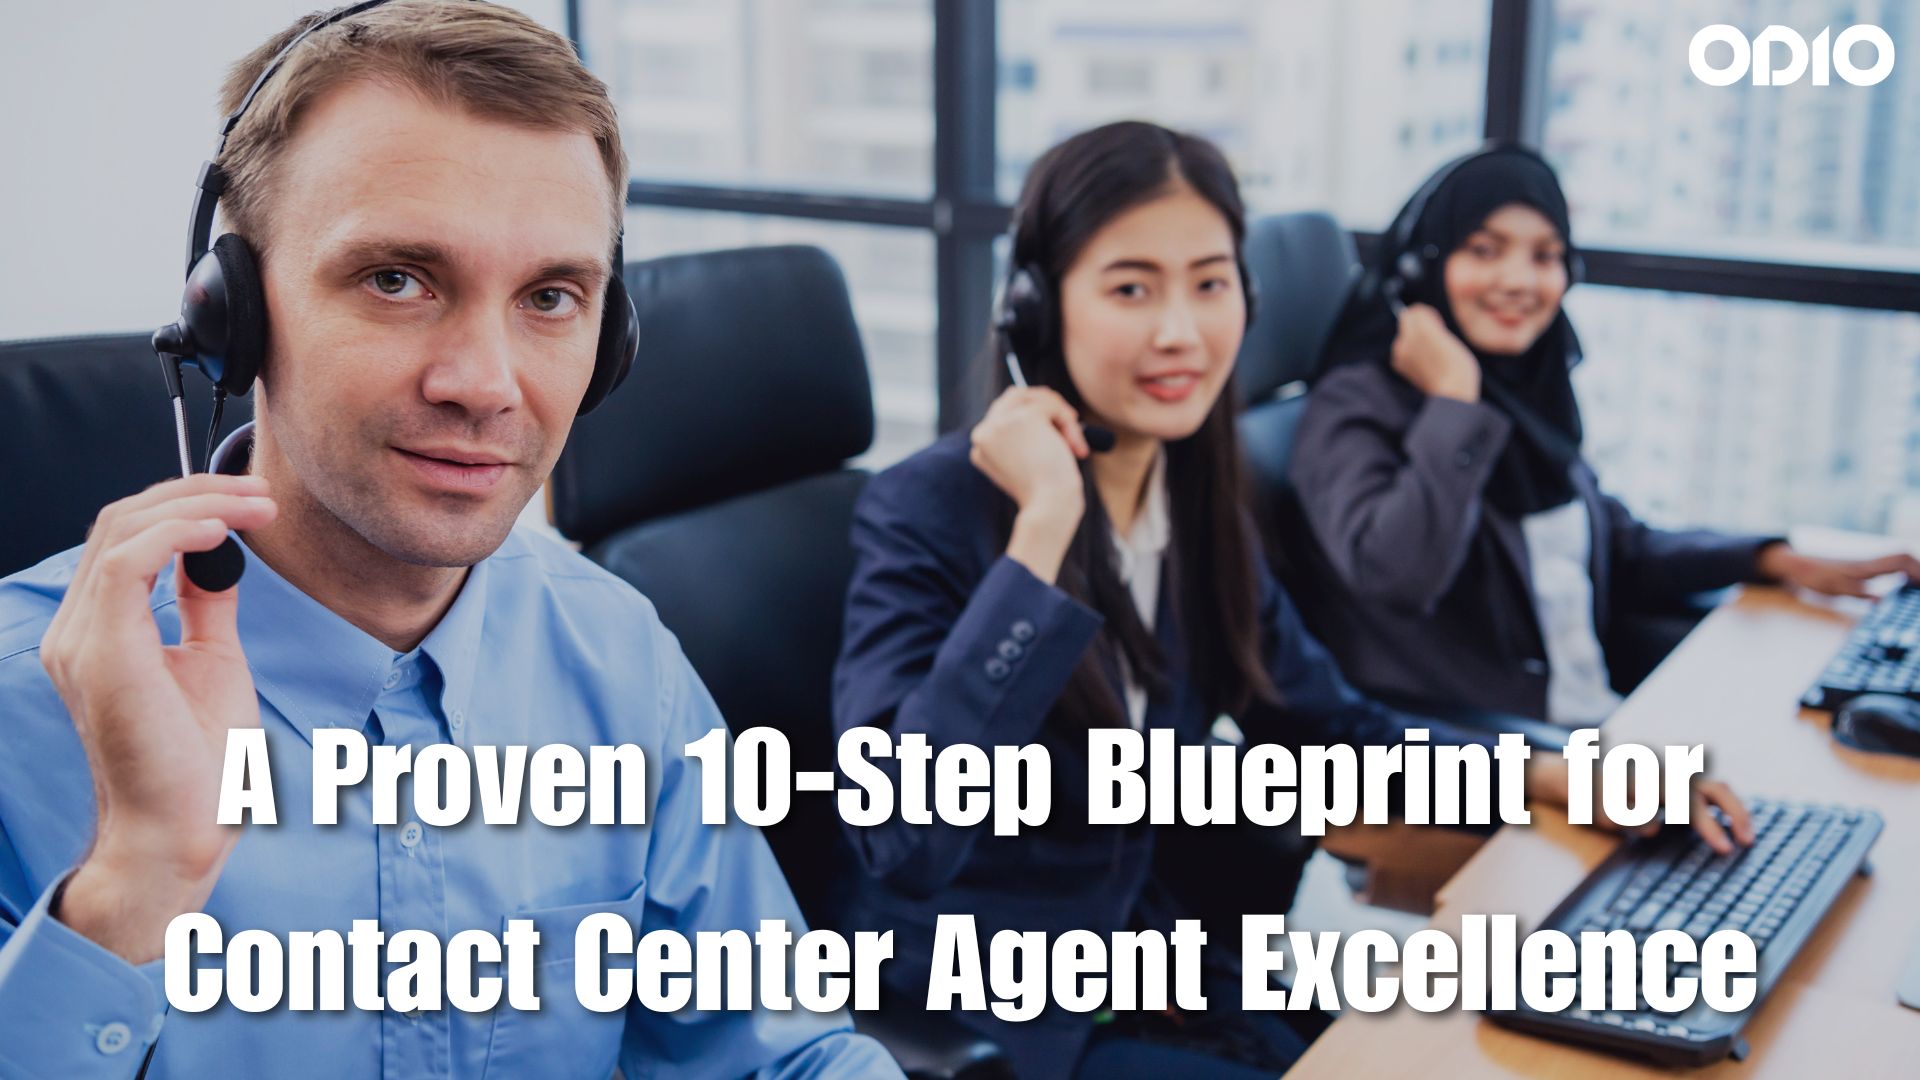 Contact Center Agent Excellence